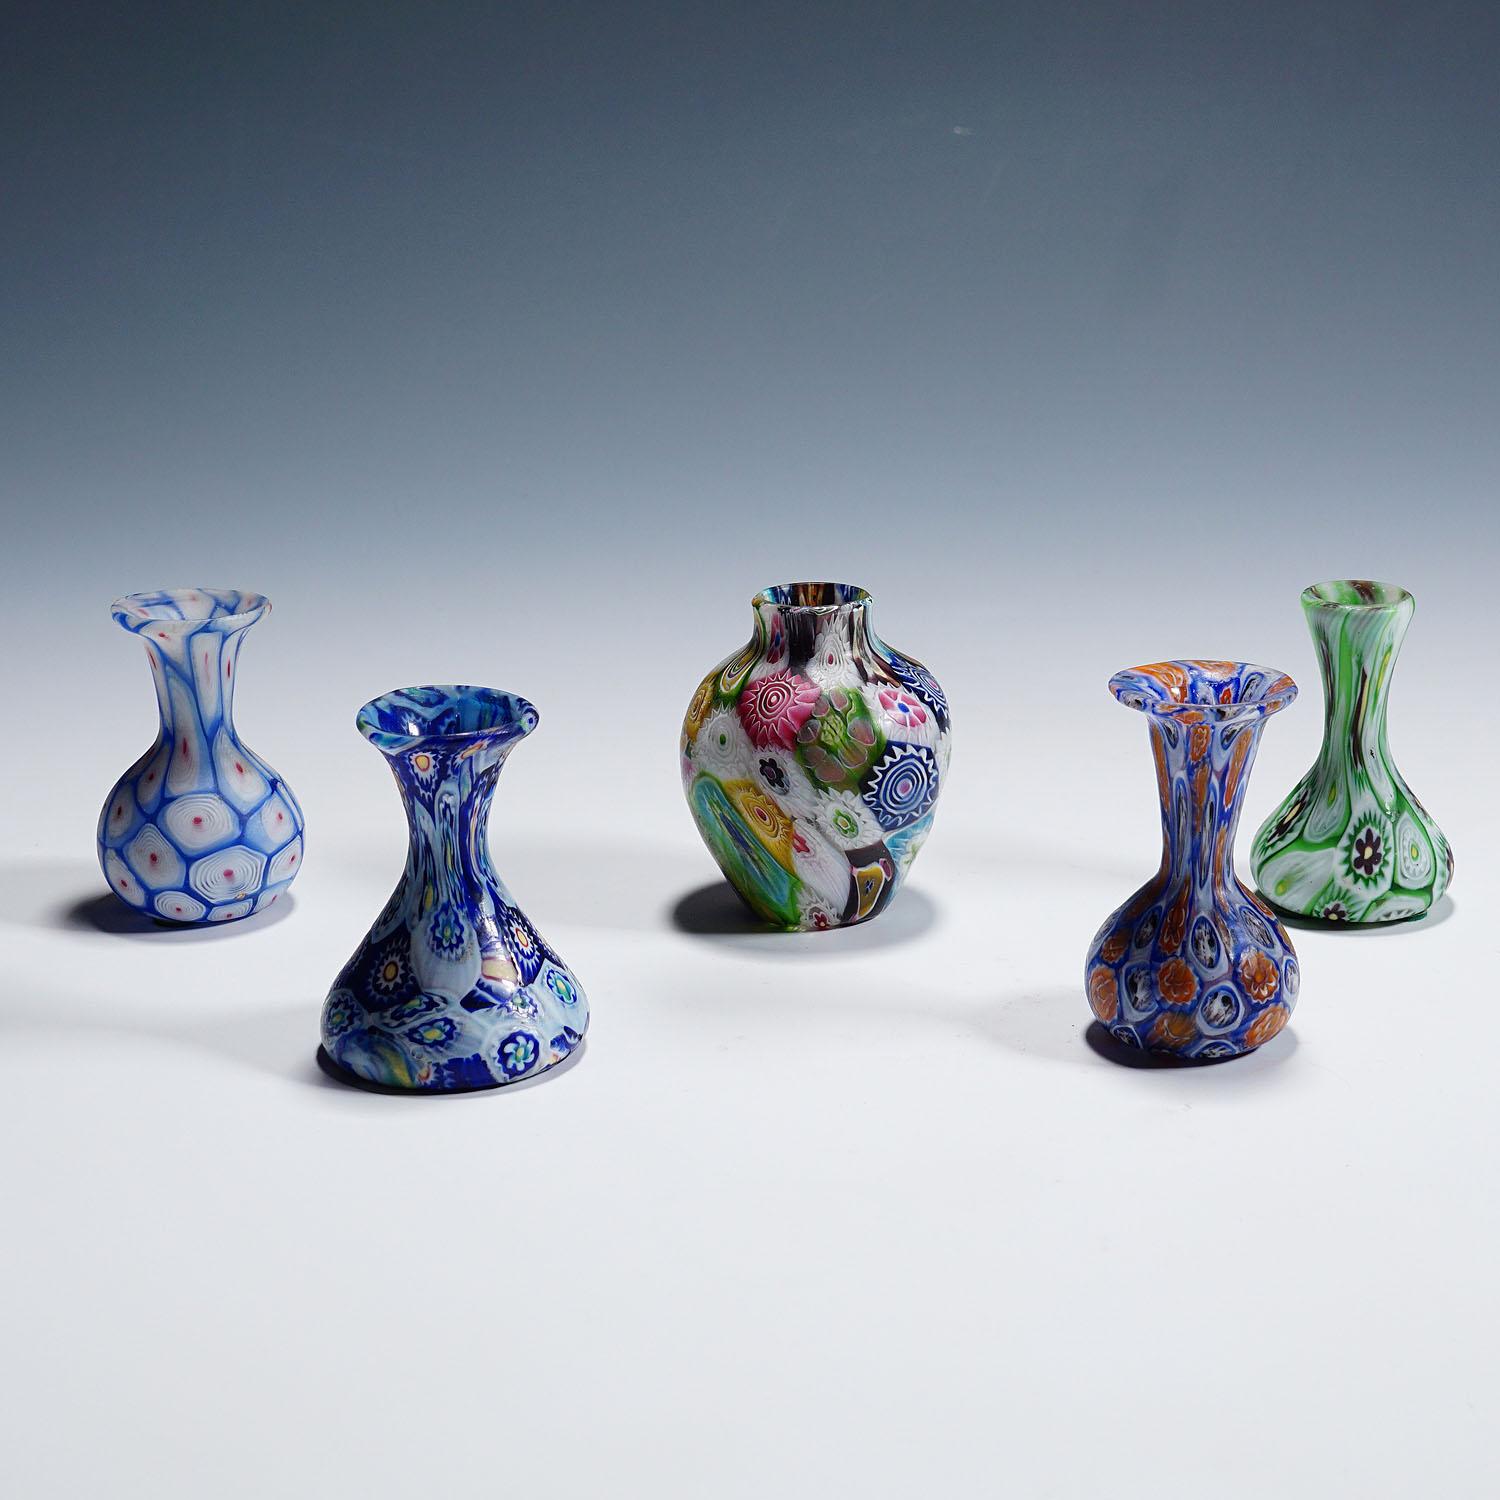 Set of Five Antique Murrine Vases by Fratelli Toso, Murano

A set of five millefiore murrine glass vases, manufactured by Vetreria Fratelli Toso around 1910-20. All vases are executed with polychrome multicoloured murrines and have an acid etched